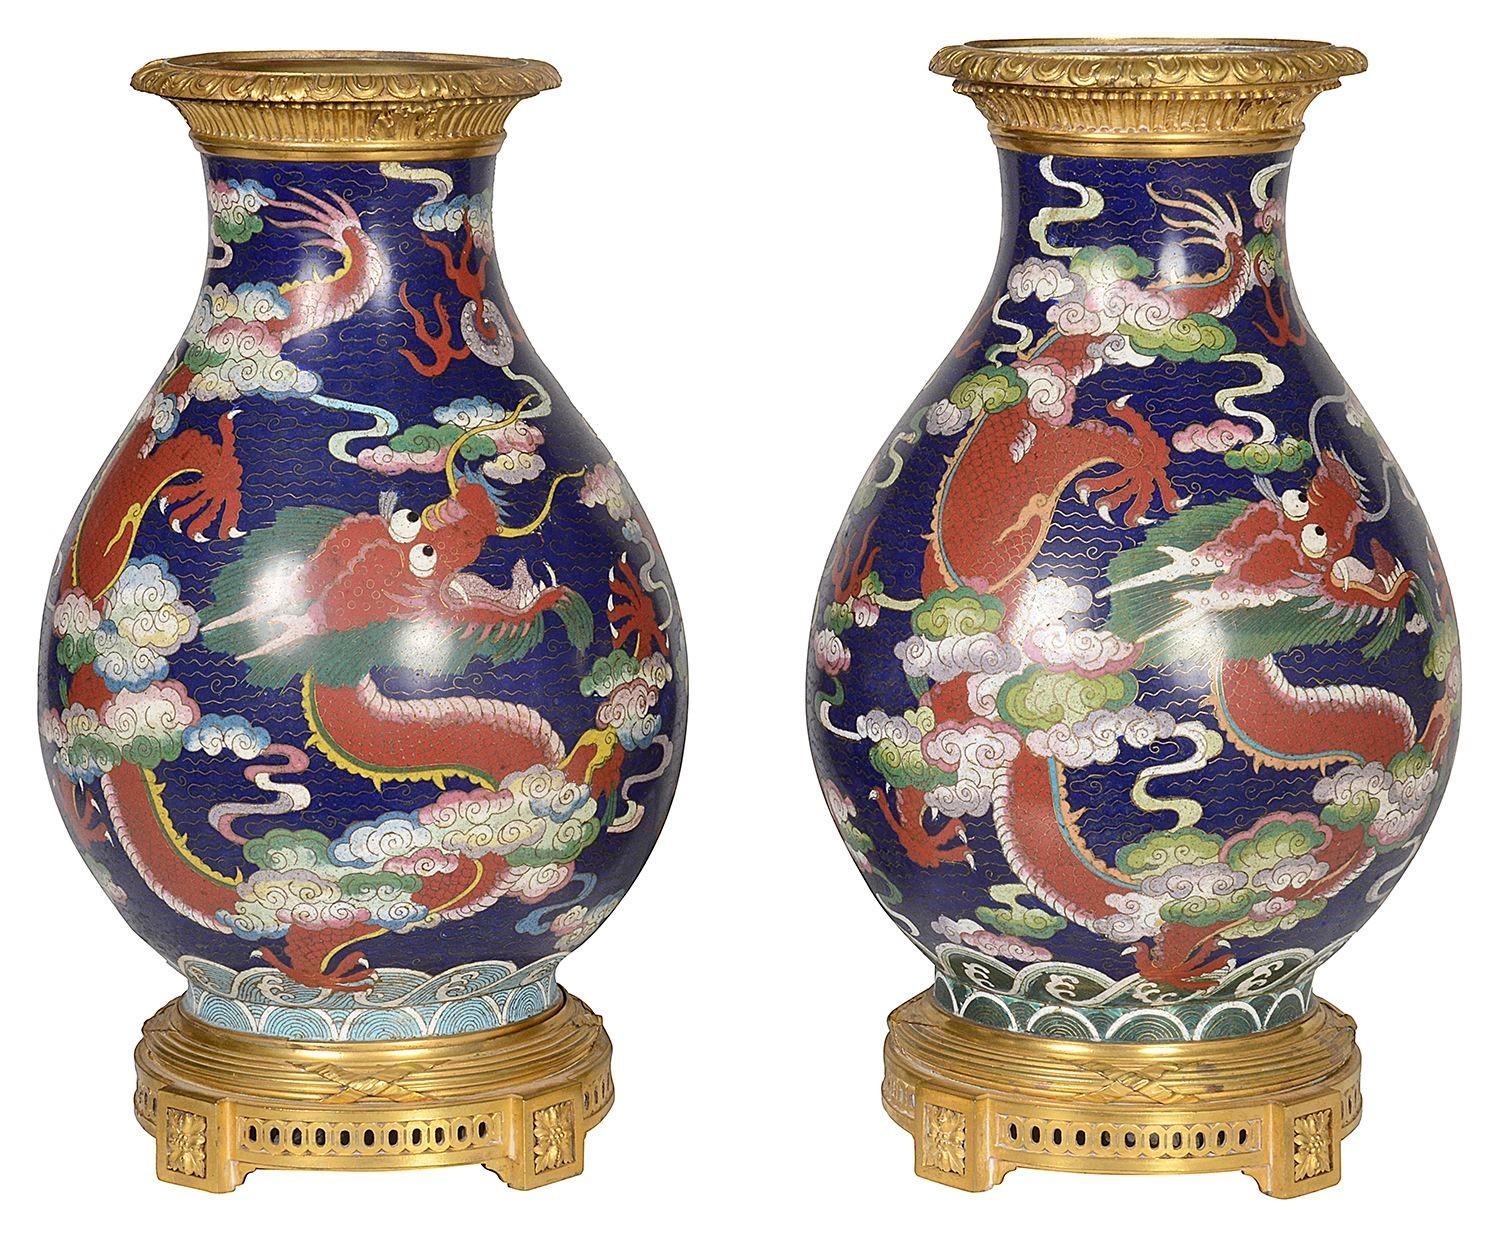 A fine quality pair of 19th century Chinese Cloisonne enamel vases, each with wonderful myithical Dragon flying among clouds. mounted with French gilded ormolu rims and plinths. 

Batch 70 61317. UYZZN.